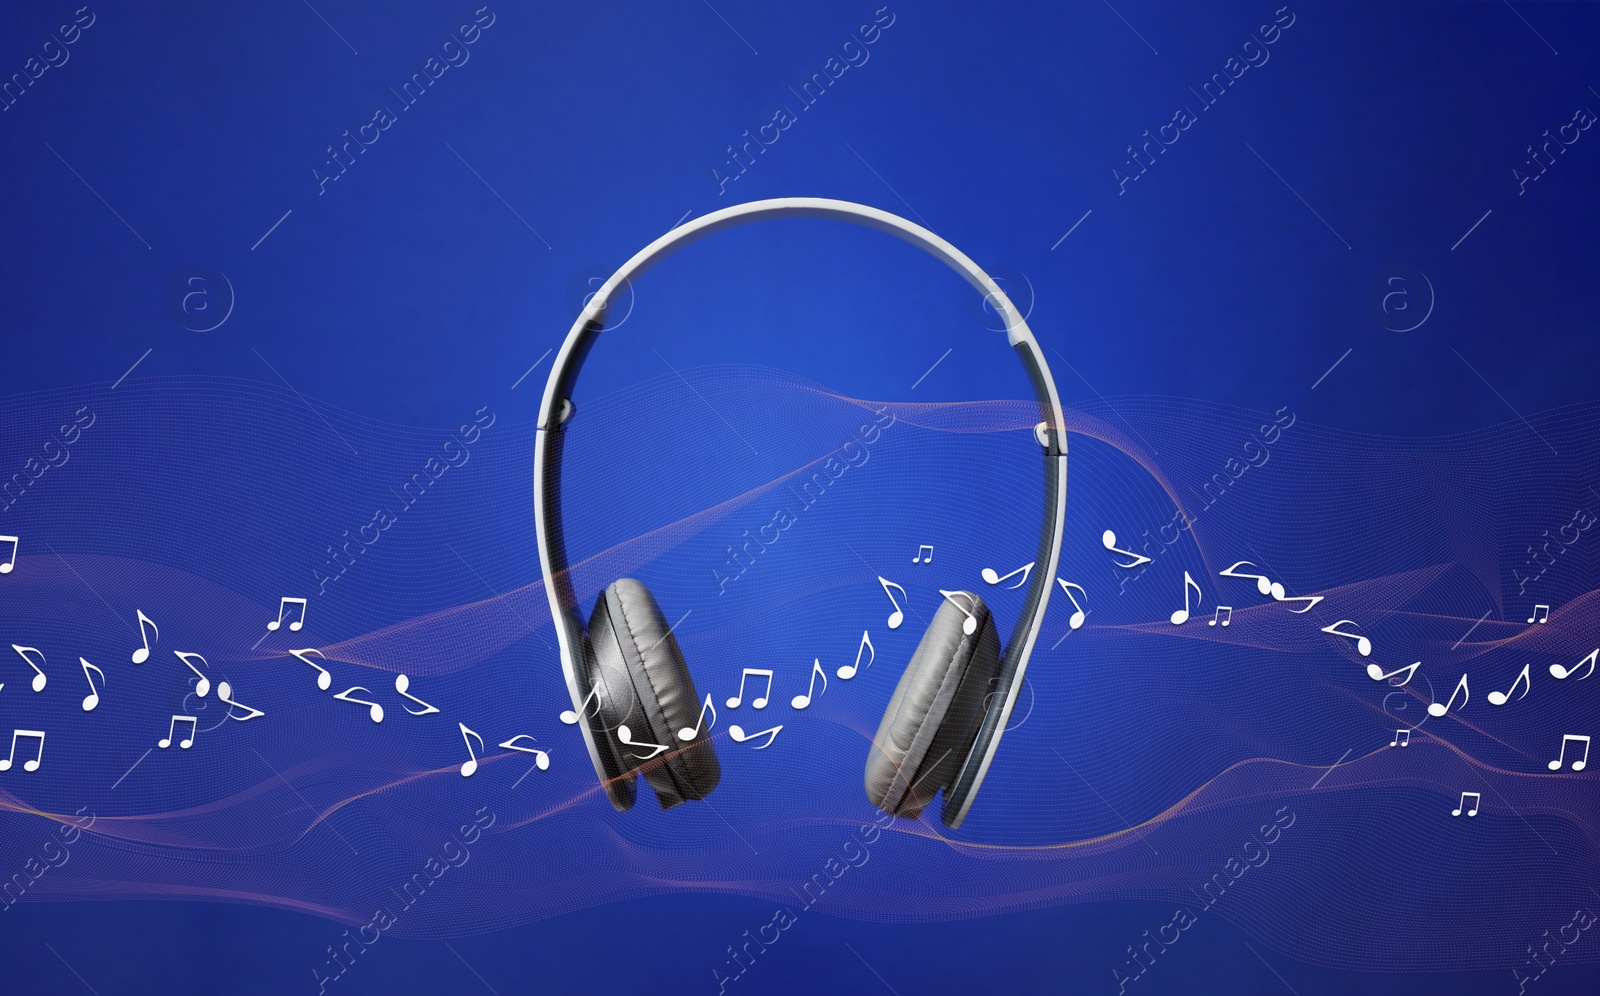 Image of Headphones and flow of music notes on blue background